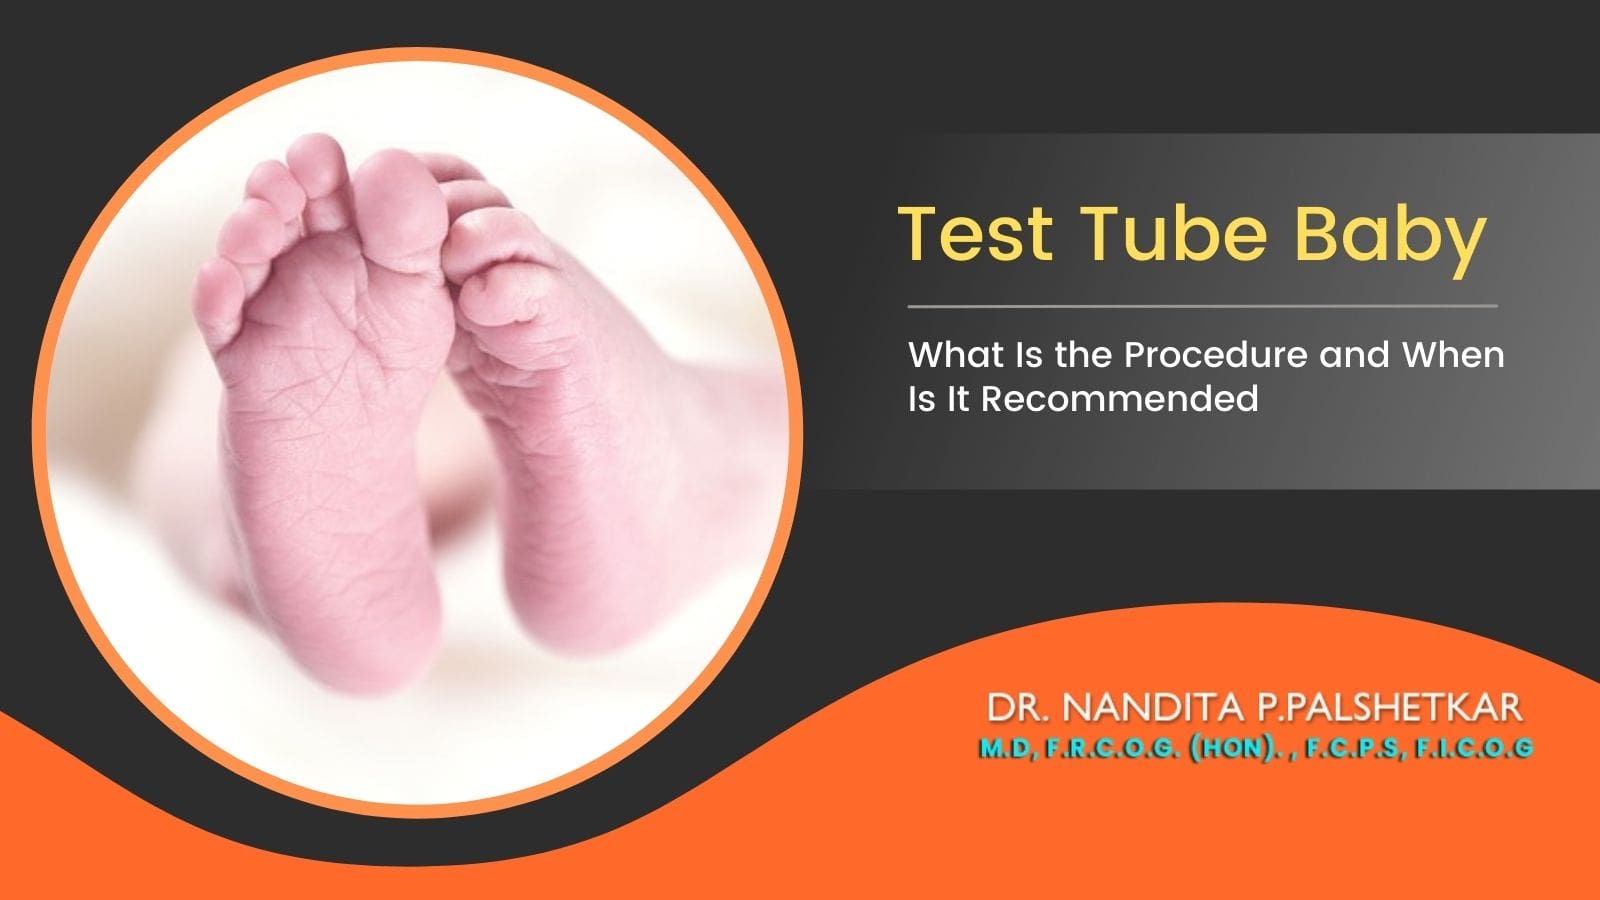 Test Tube Baby - What Is the Procedure and When Is It Recommended